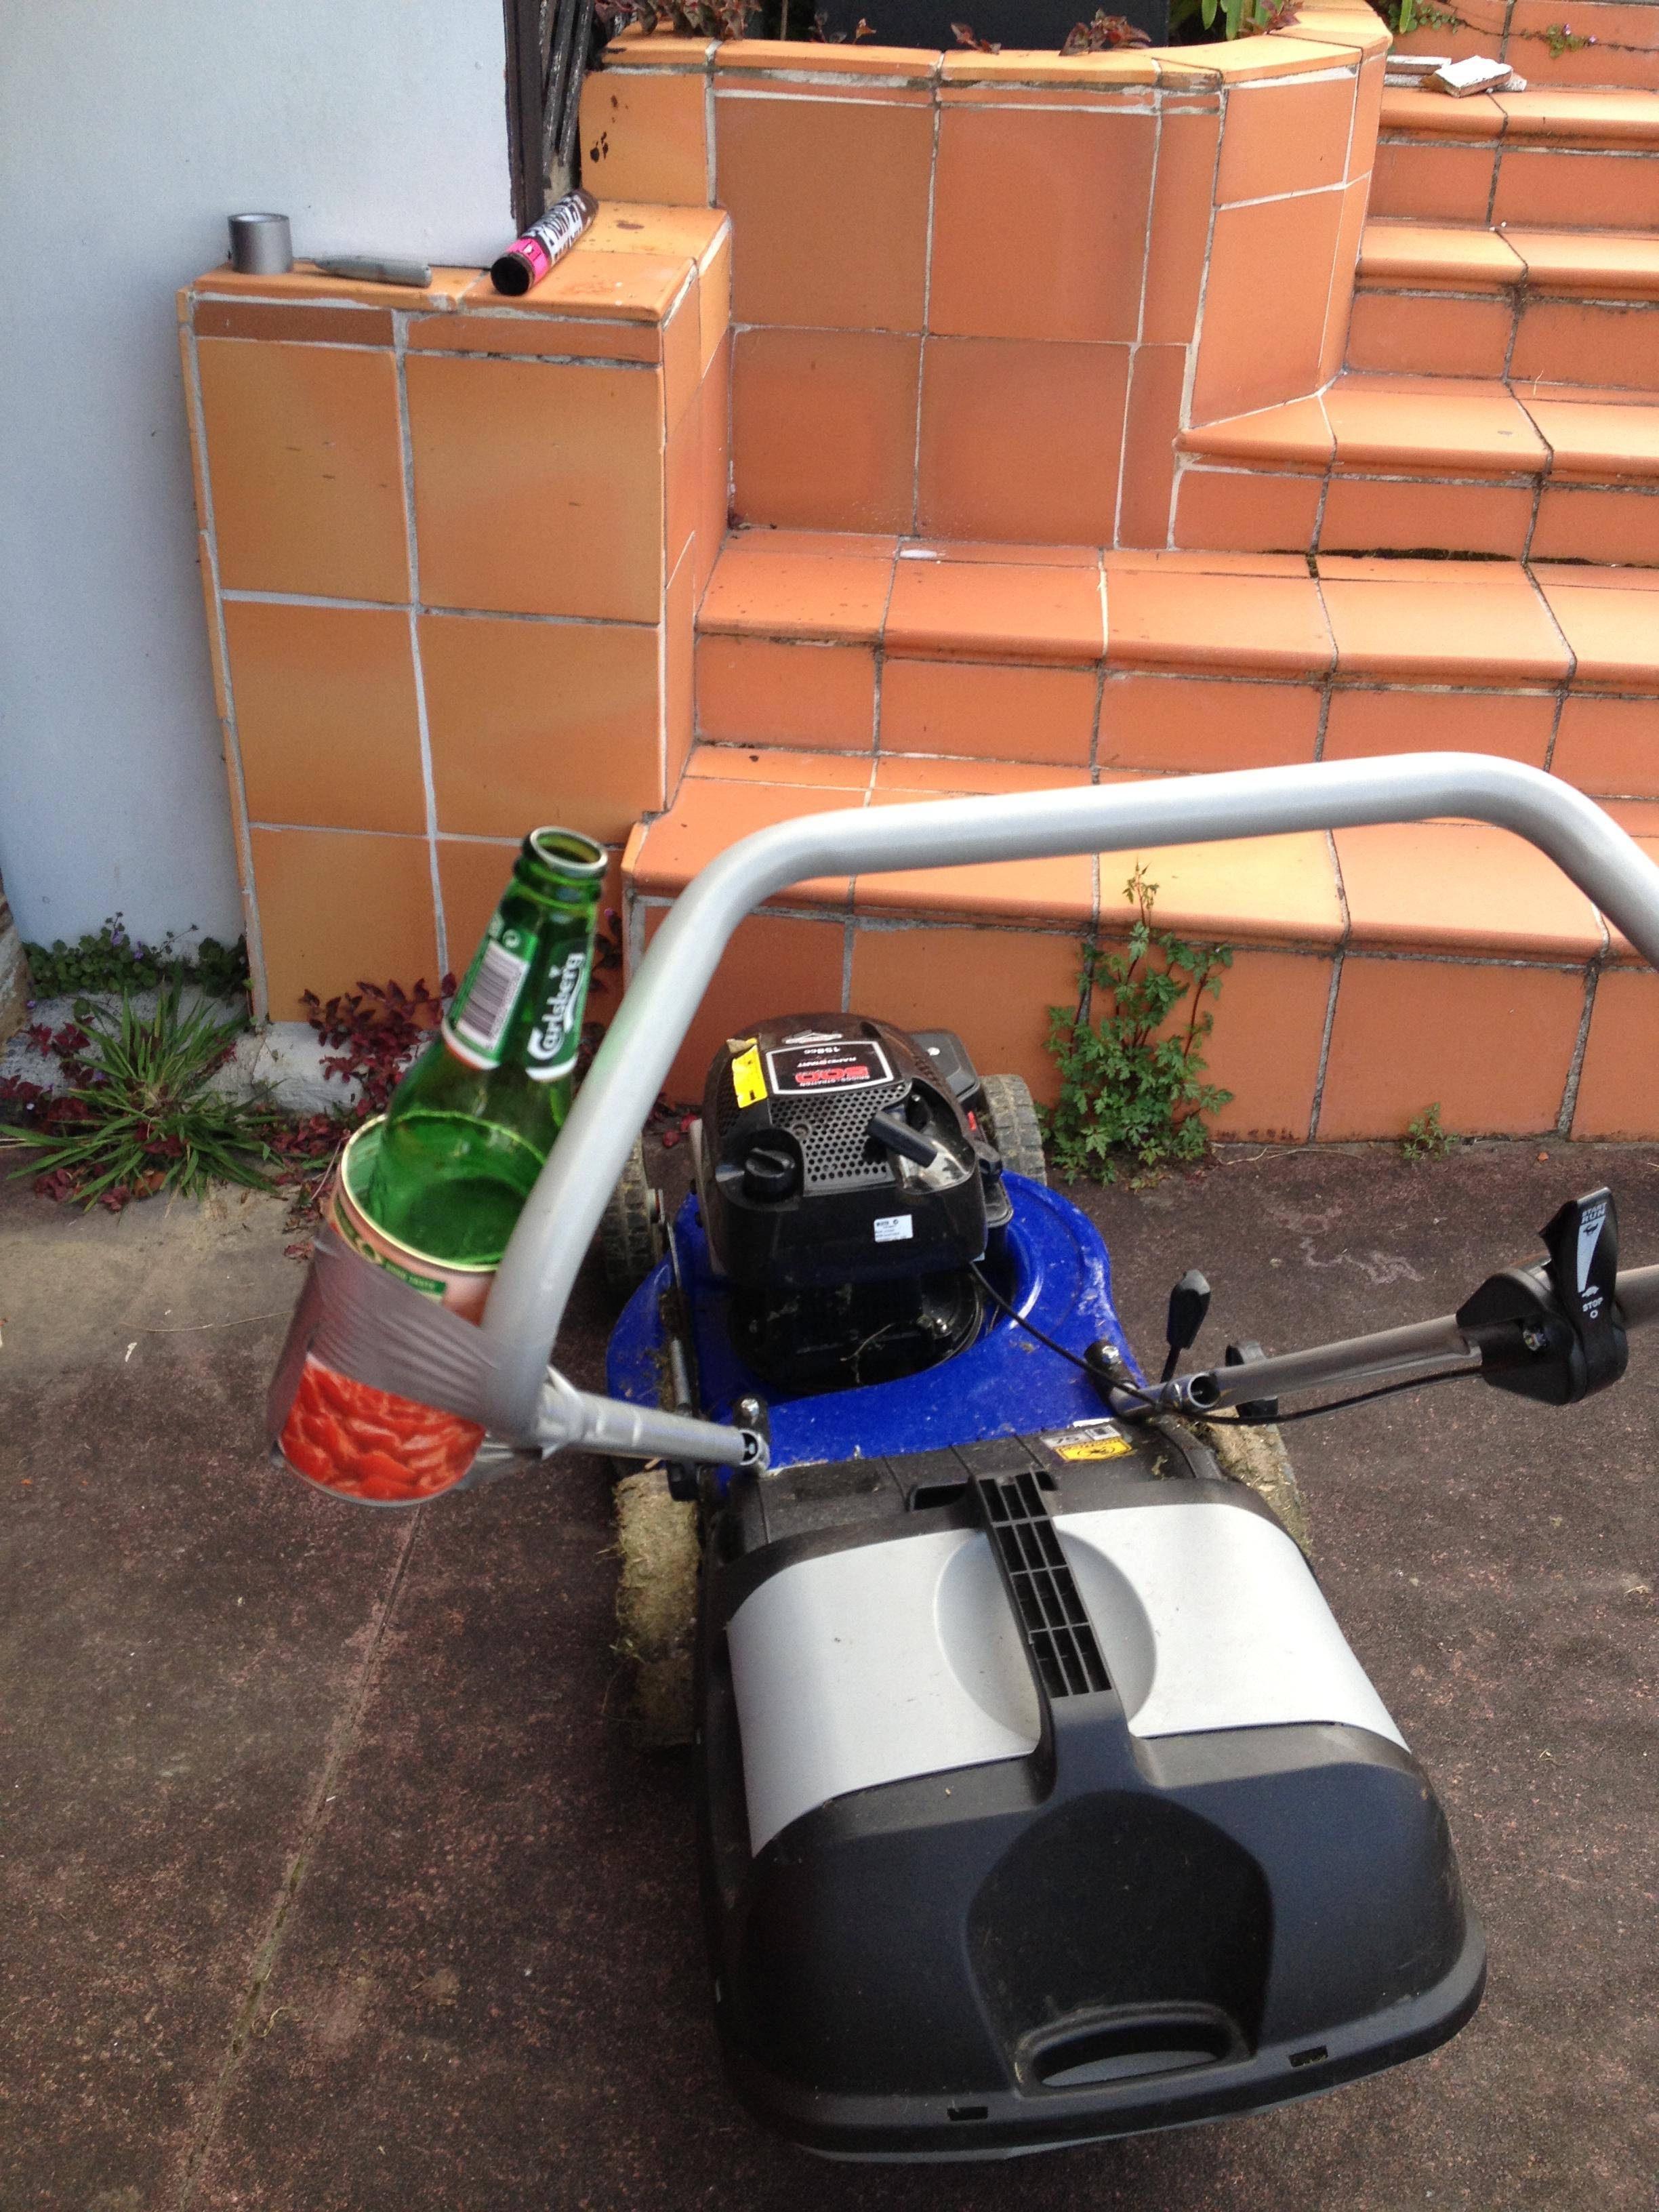 You're mowing your lawn and feel the desire for a drink holder, Bean can.